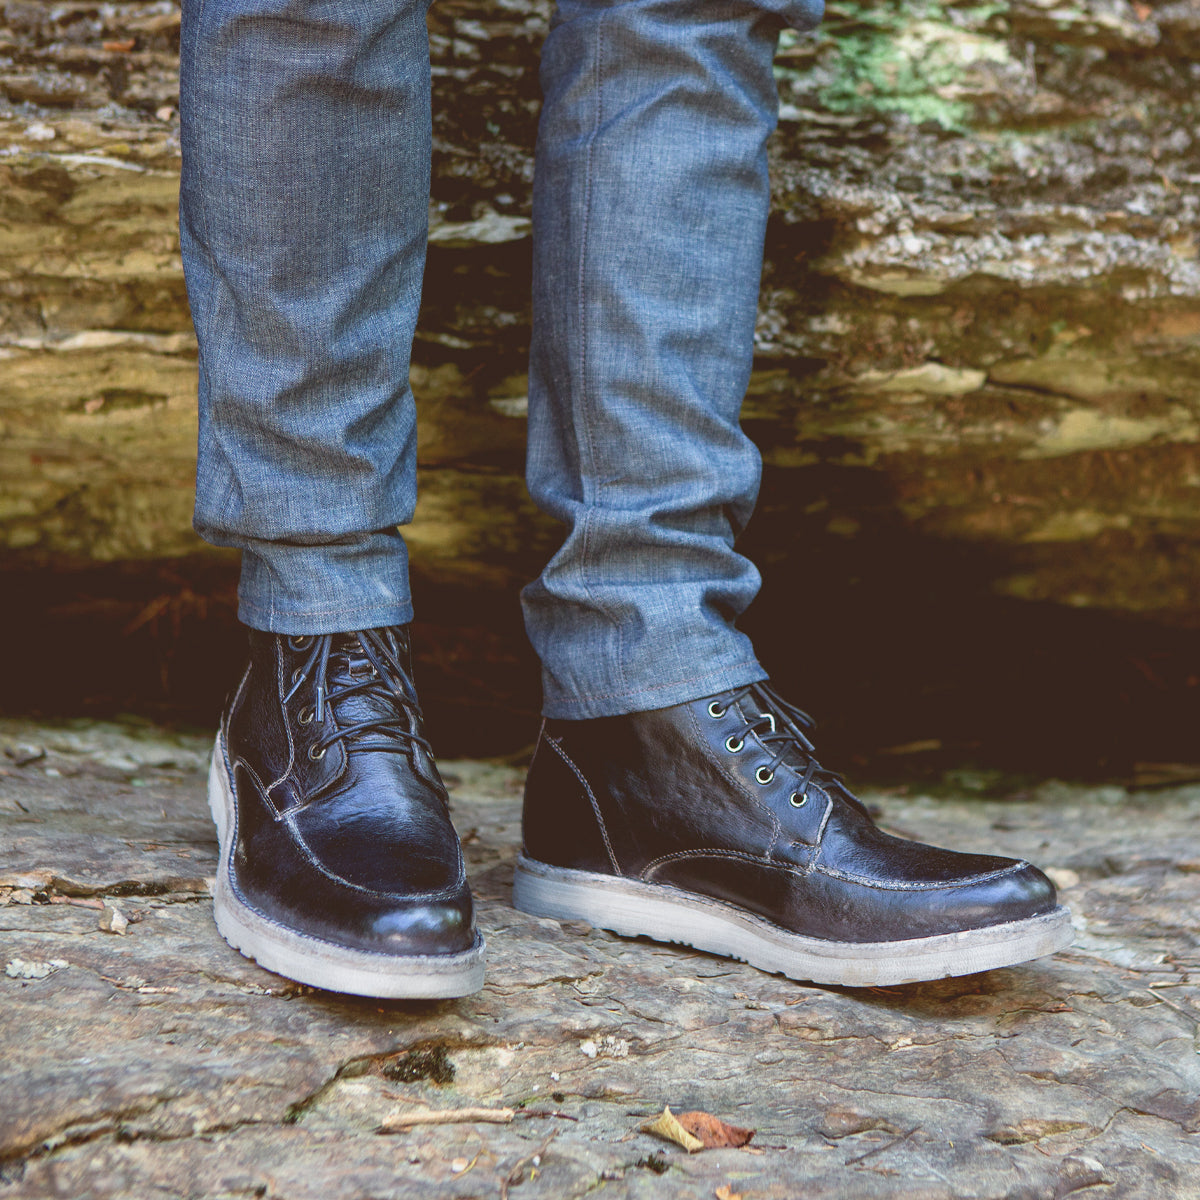 Close-up of a person wearing dark blue Lincoln jeans and Bed Stu black leather work boots standing on a rocky surface.